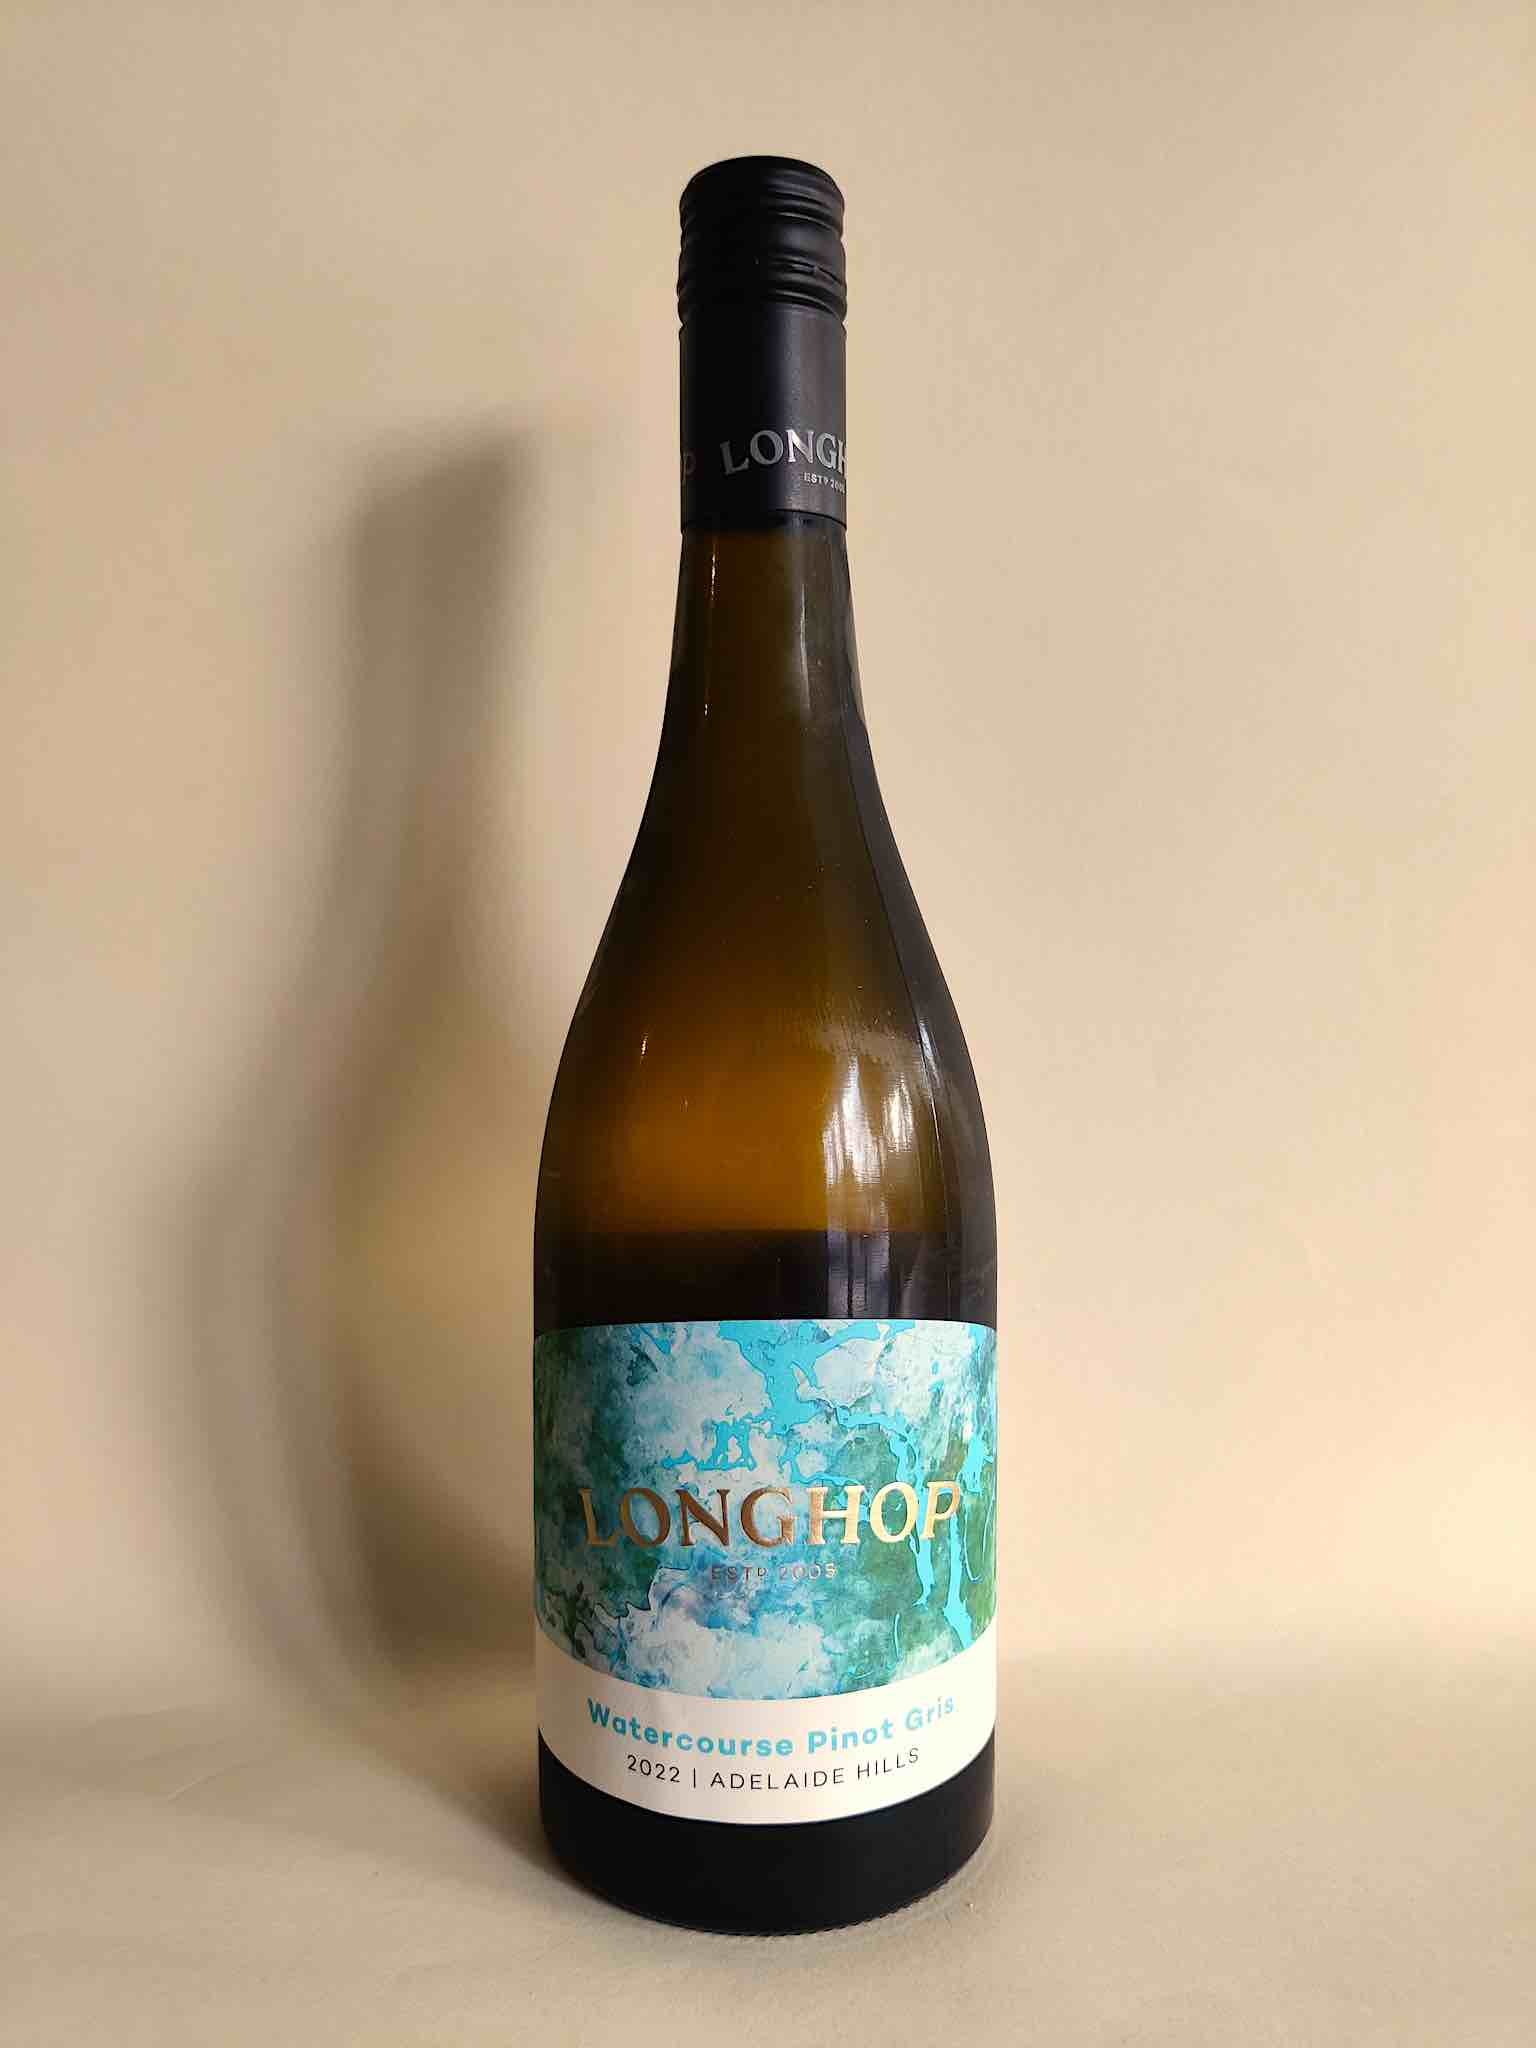 A bottle of Longhop Watercourse Pinot Gris from the Adelaide Hills, South Australia. 